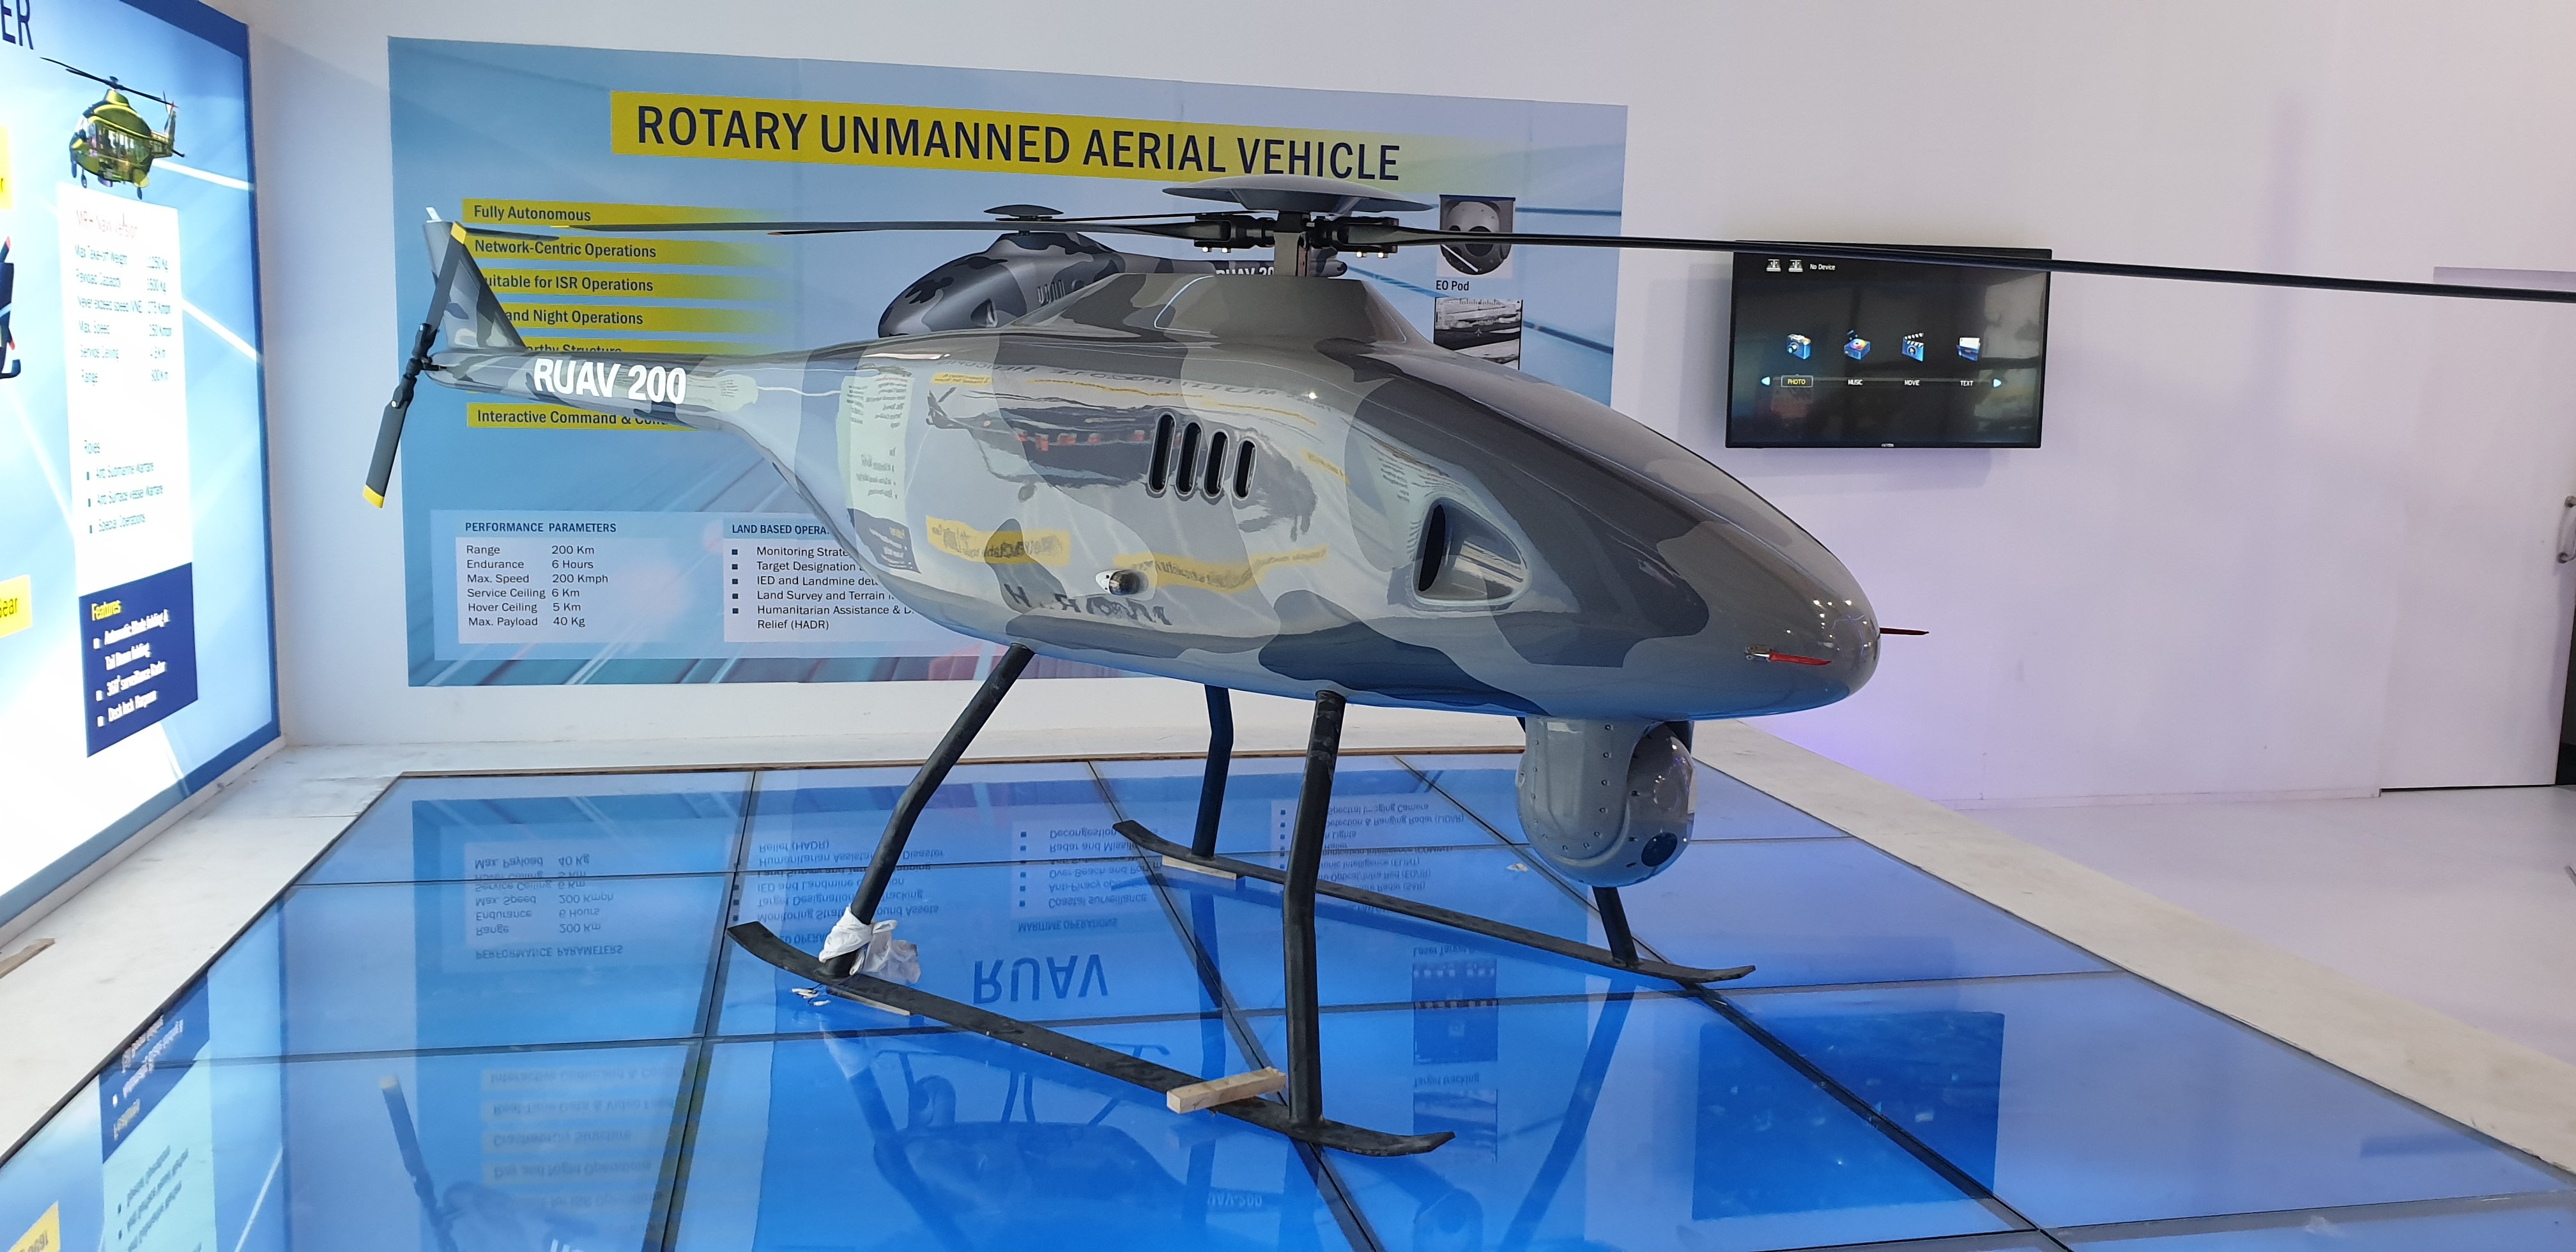 Strikes from 700km away to drones replacing mules for ration at 15,000ft,  India gears up for unmanned warfare - India Today